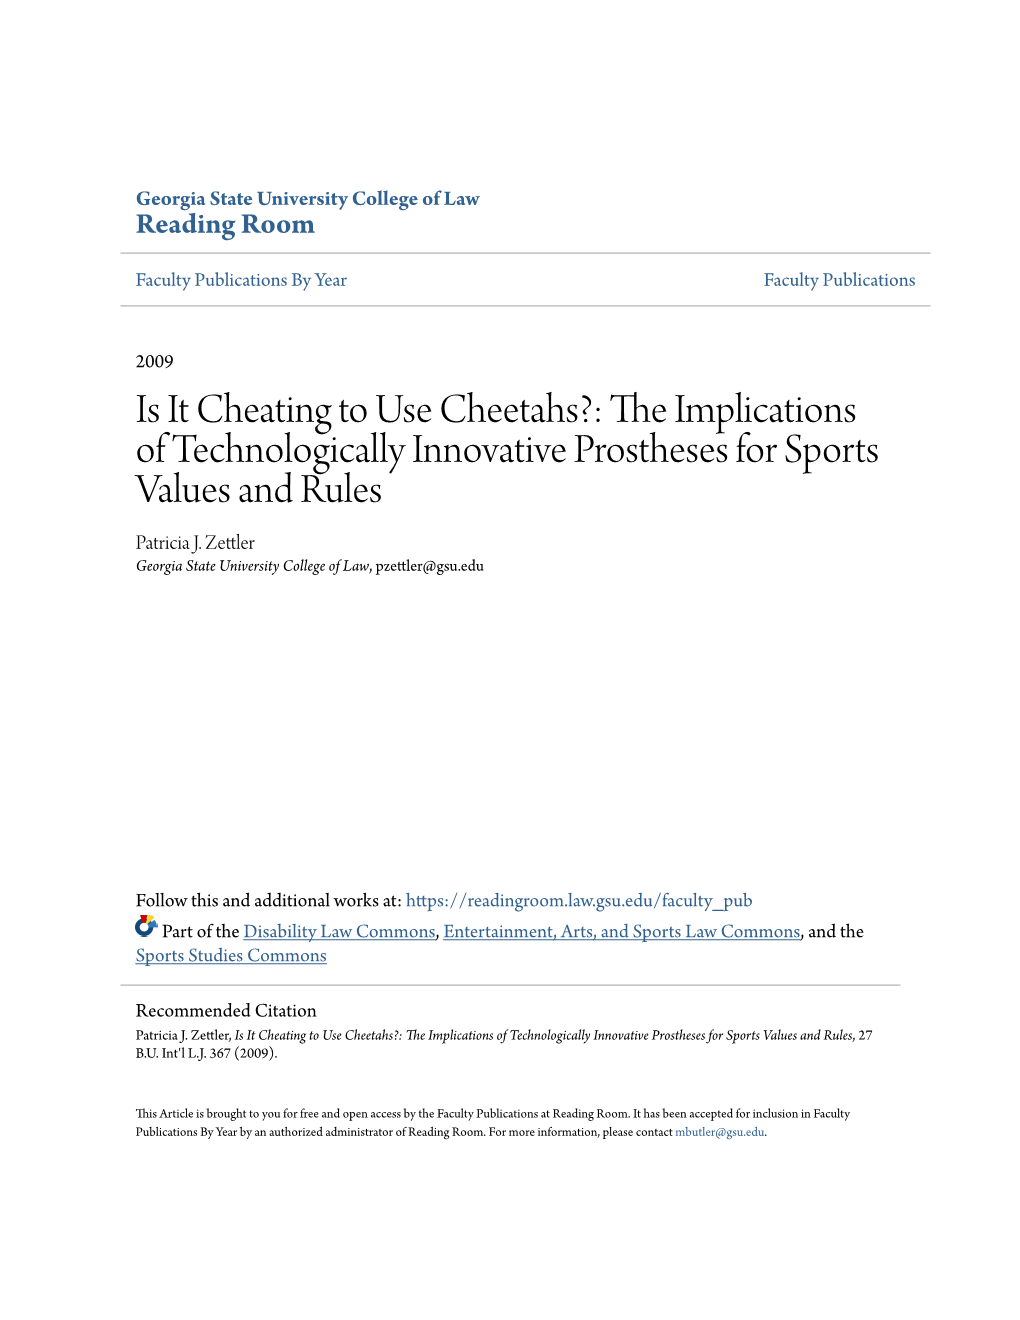 The Implications of Technologically Innovative Prostheses for Sports Values and Rules, 27 B.U